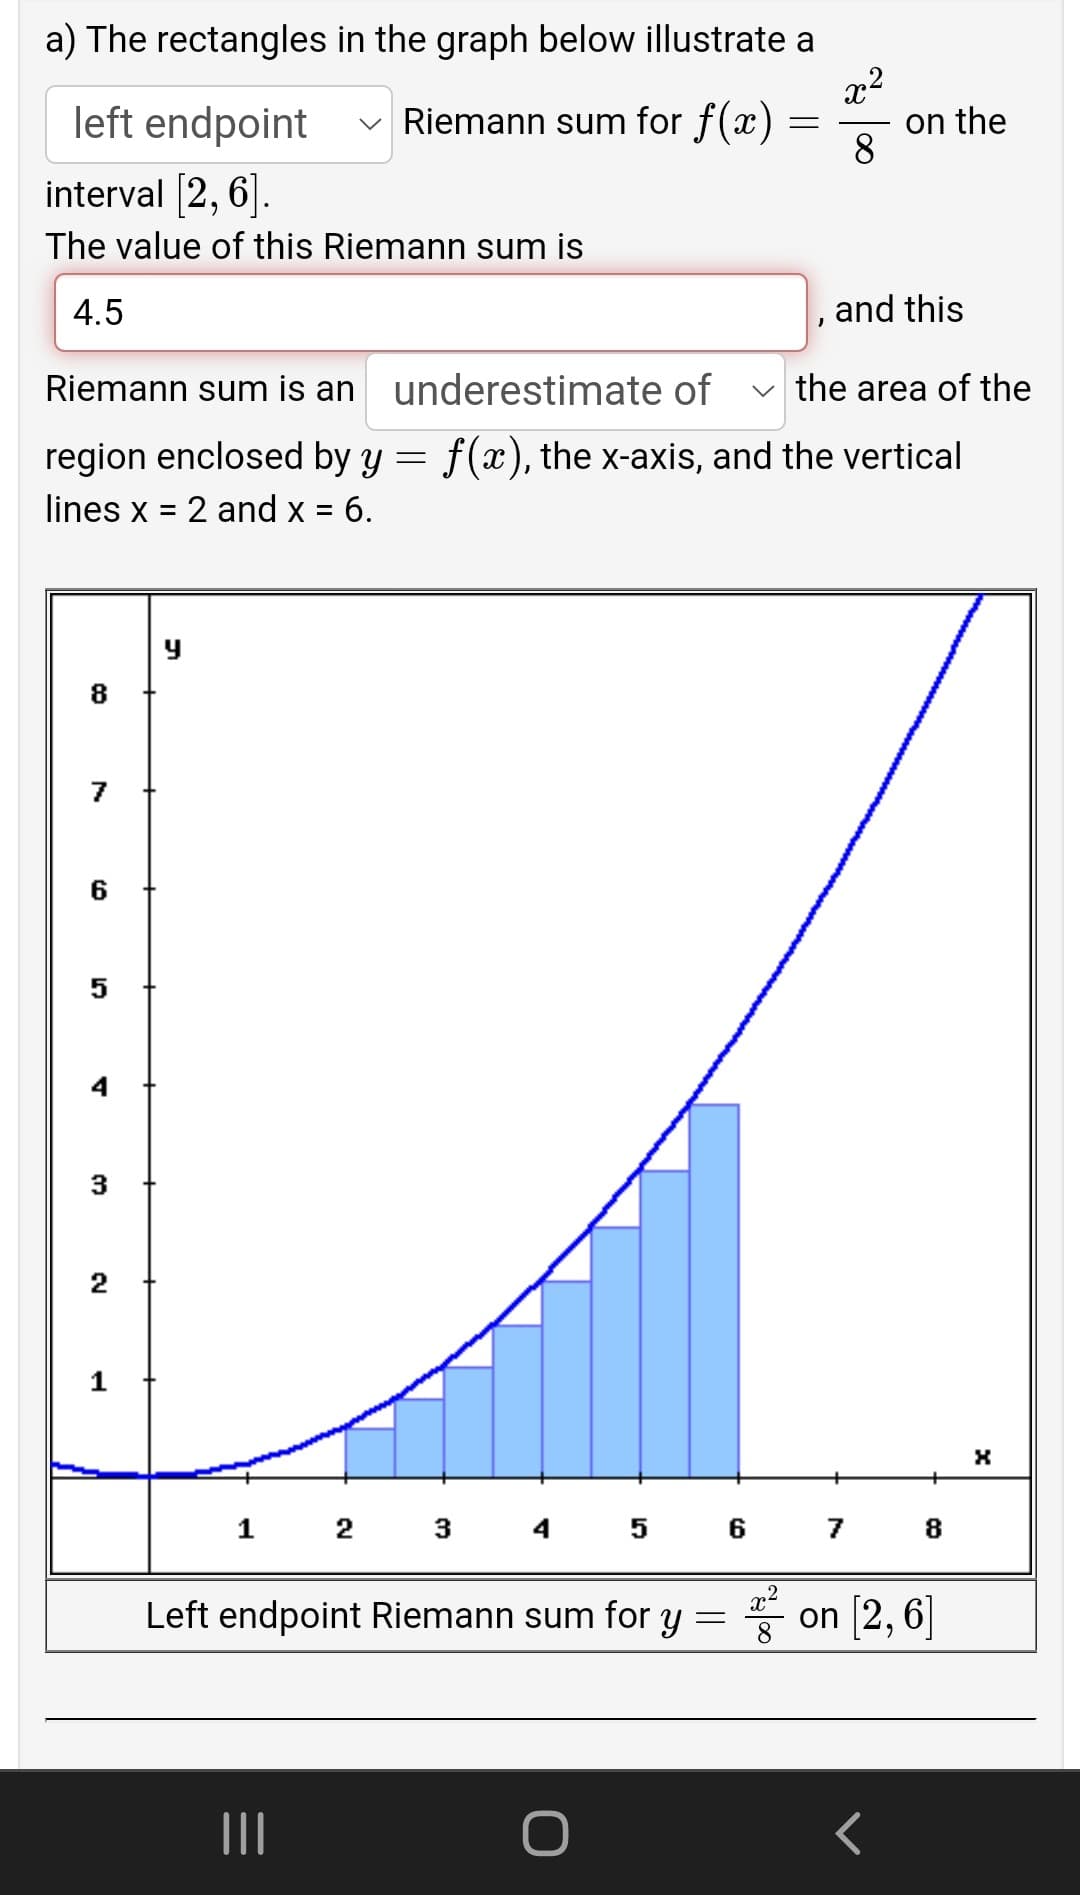 a) The rectangles in the graph below illustrate a
left endpoint
v Riemann sum for f(x)
on the
8
interval (2, 6].
The value of this Riemann sum is
4.5
, and this
Riemann sum is an
underestimate of
v the area of the
region enclosed by y = f(x), the x-axis, and the vertical
lines x = 2 and x = 6.
8
6
4
3
2
1
1 2 3 4 5 6 7
8
Left endpoint Riemann sum for y = on [2, 6]
II
